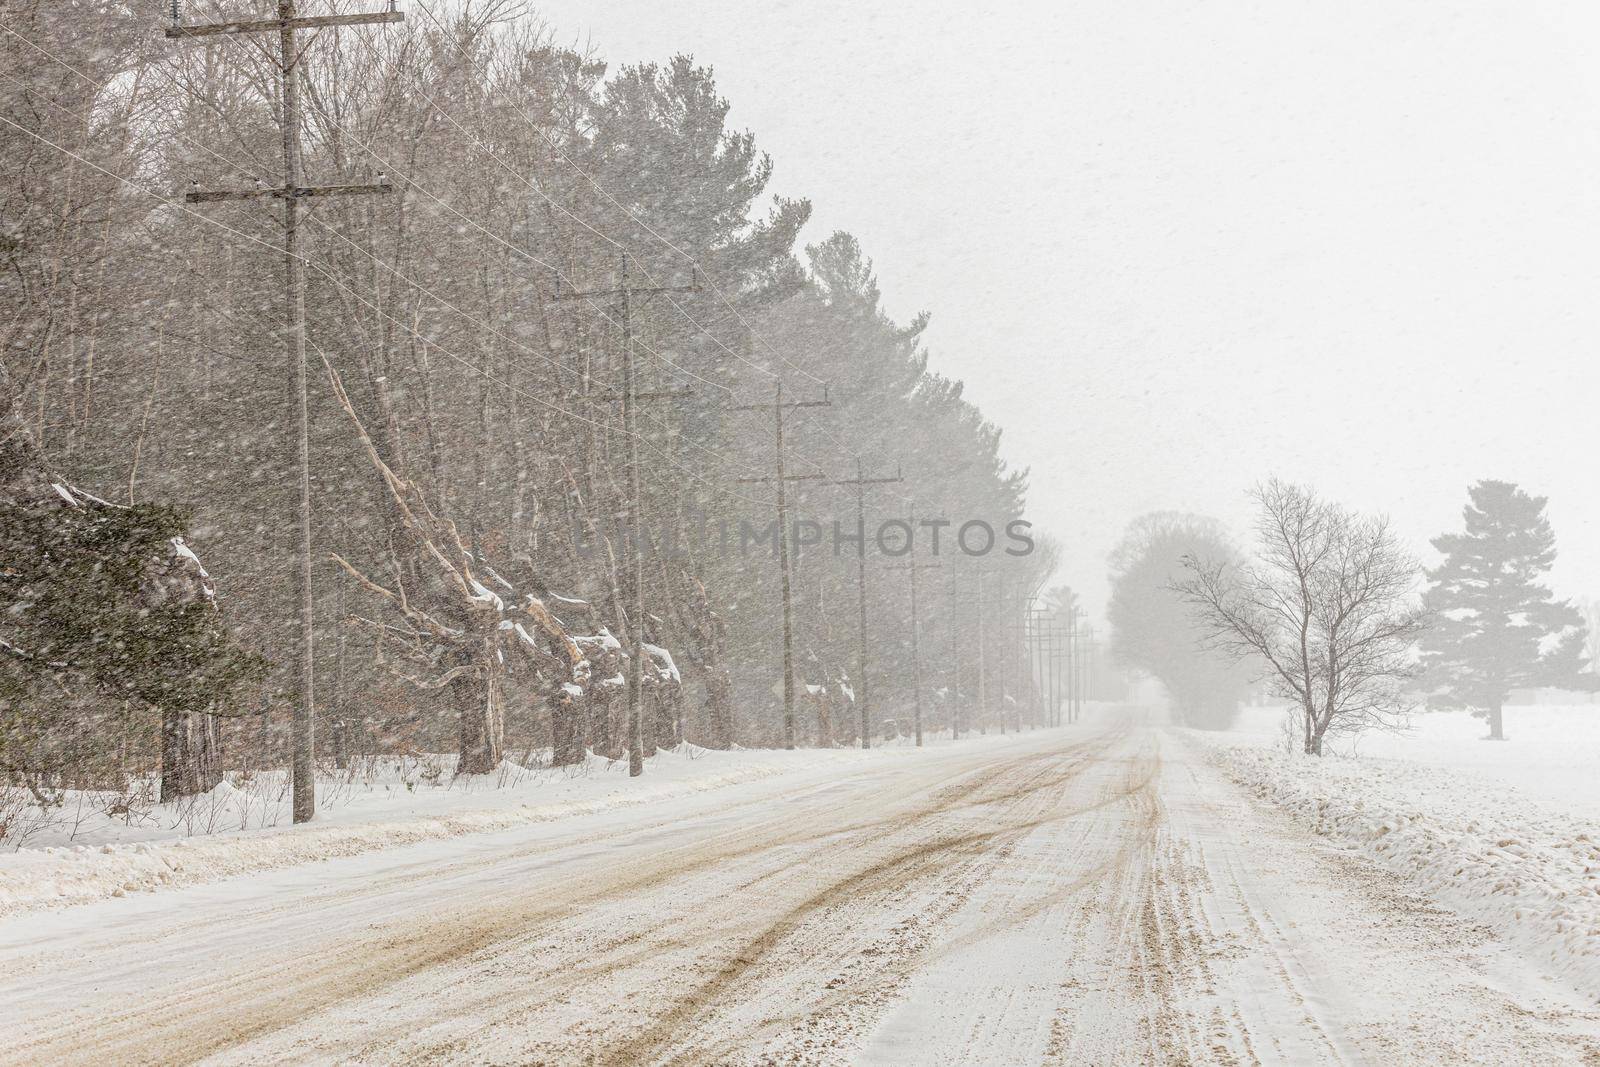 Snow Squall Conditions on a Country Road in Ontario Canada by markvandam